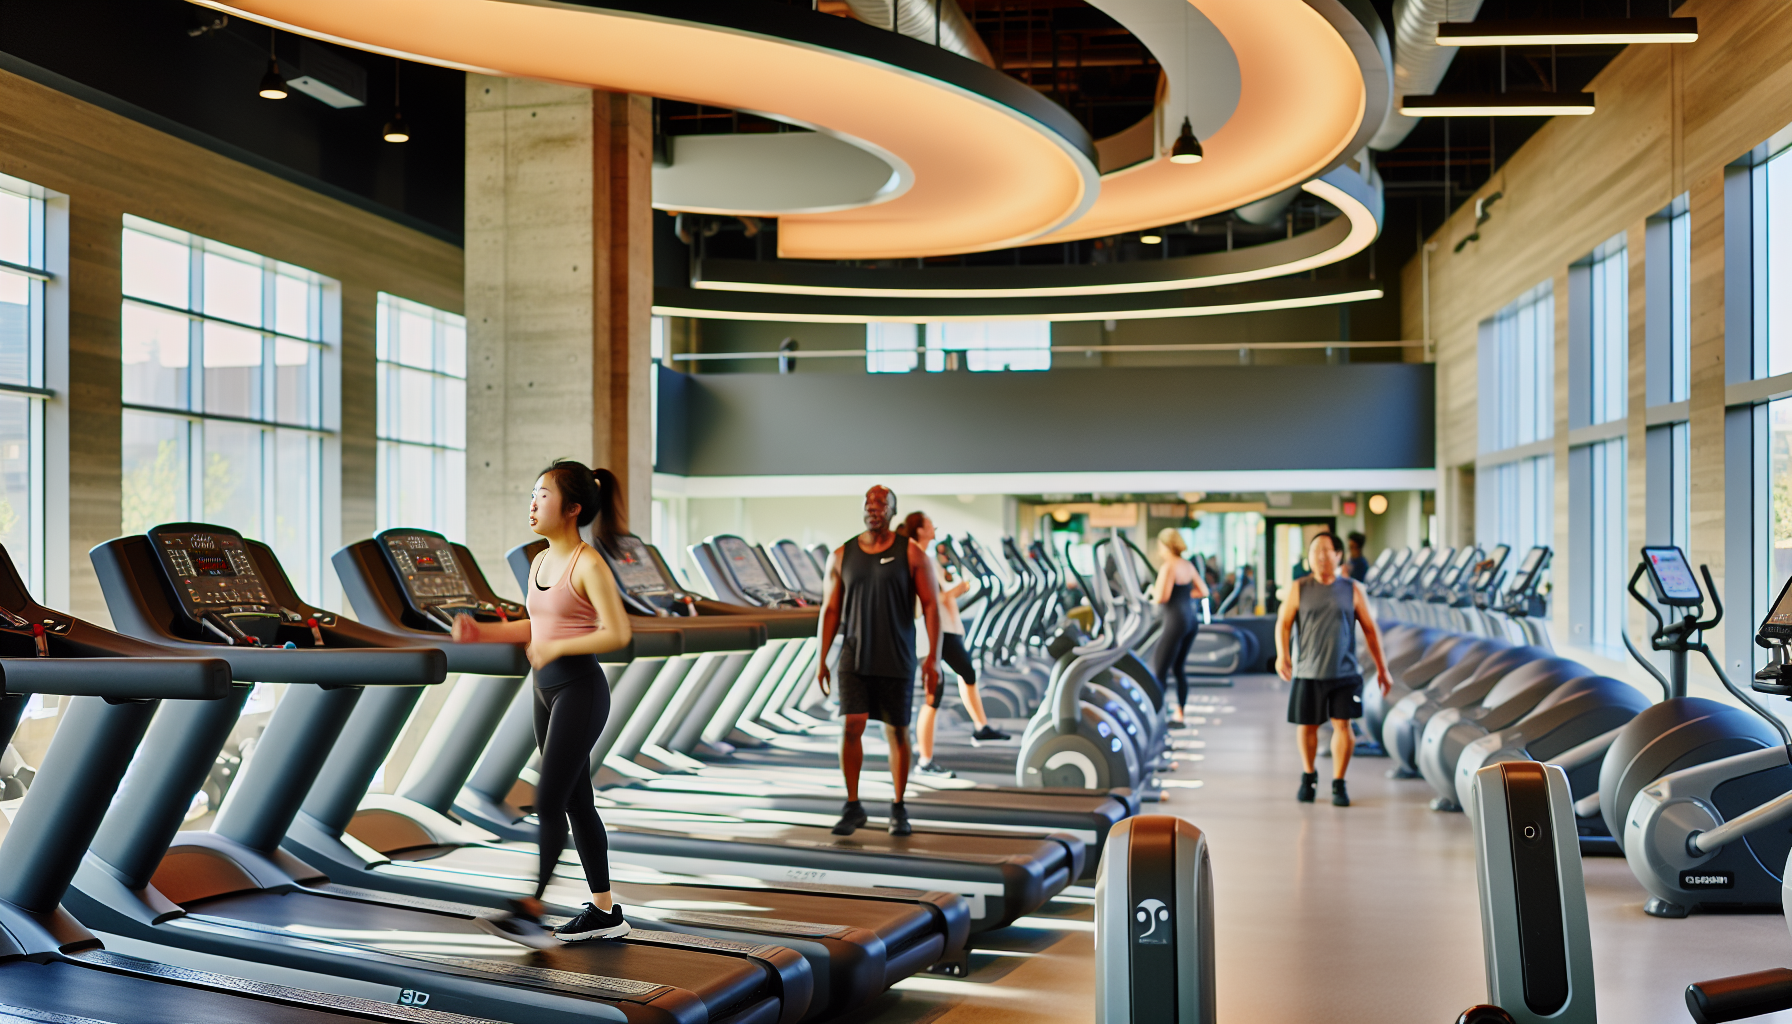 Luxury gym equipment and spacious interior at Vancouver's elite fitness center